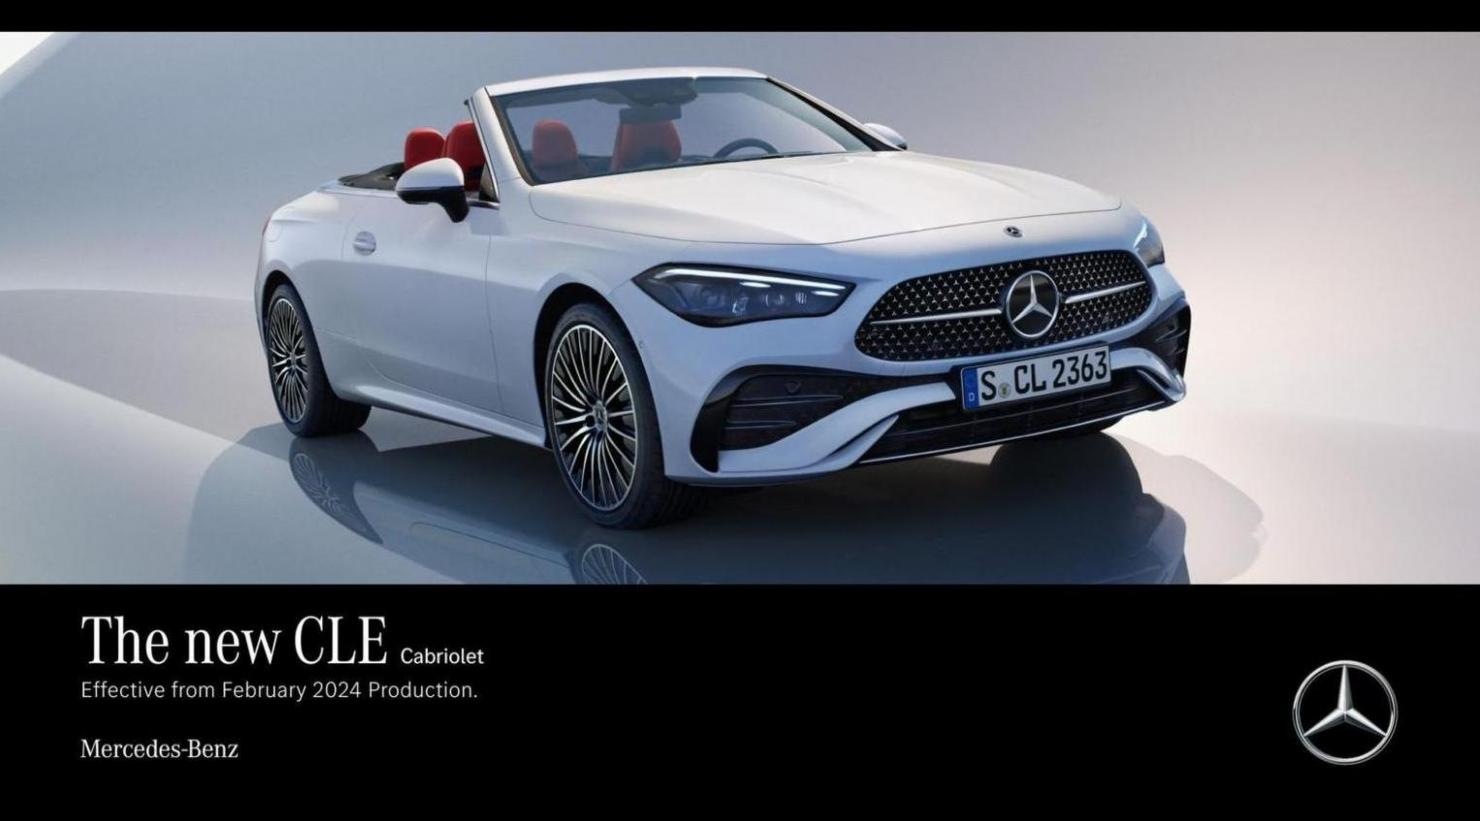 The new CLE Cabriolet. Mercedes-Benz (2025-02-15-2025-02-15)